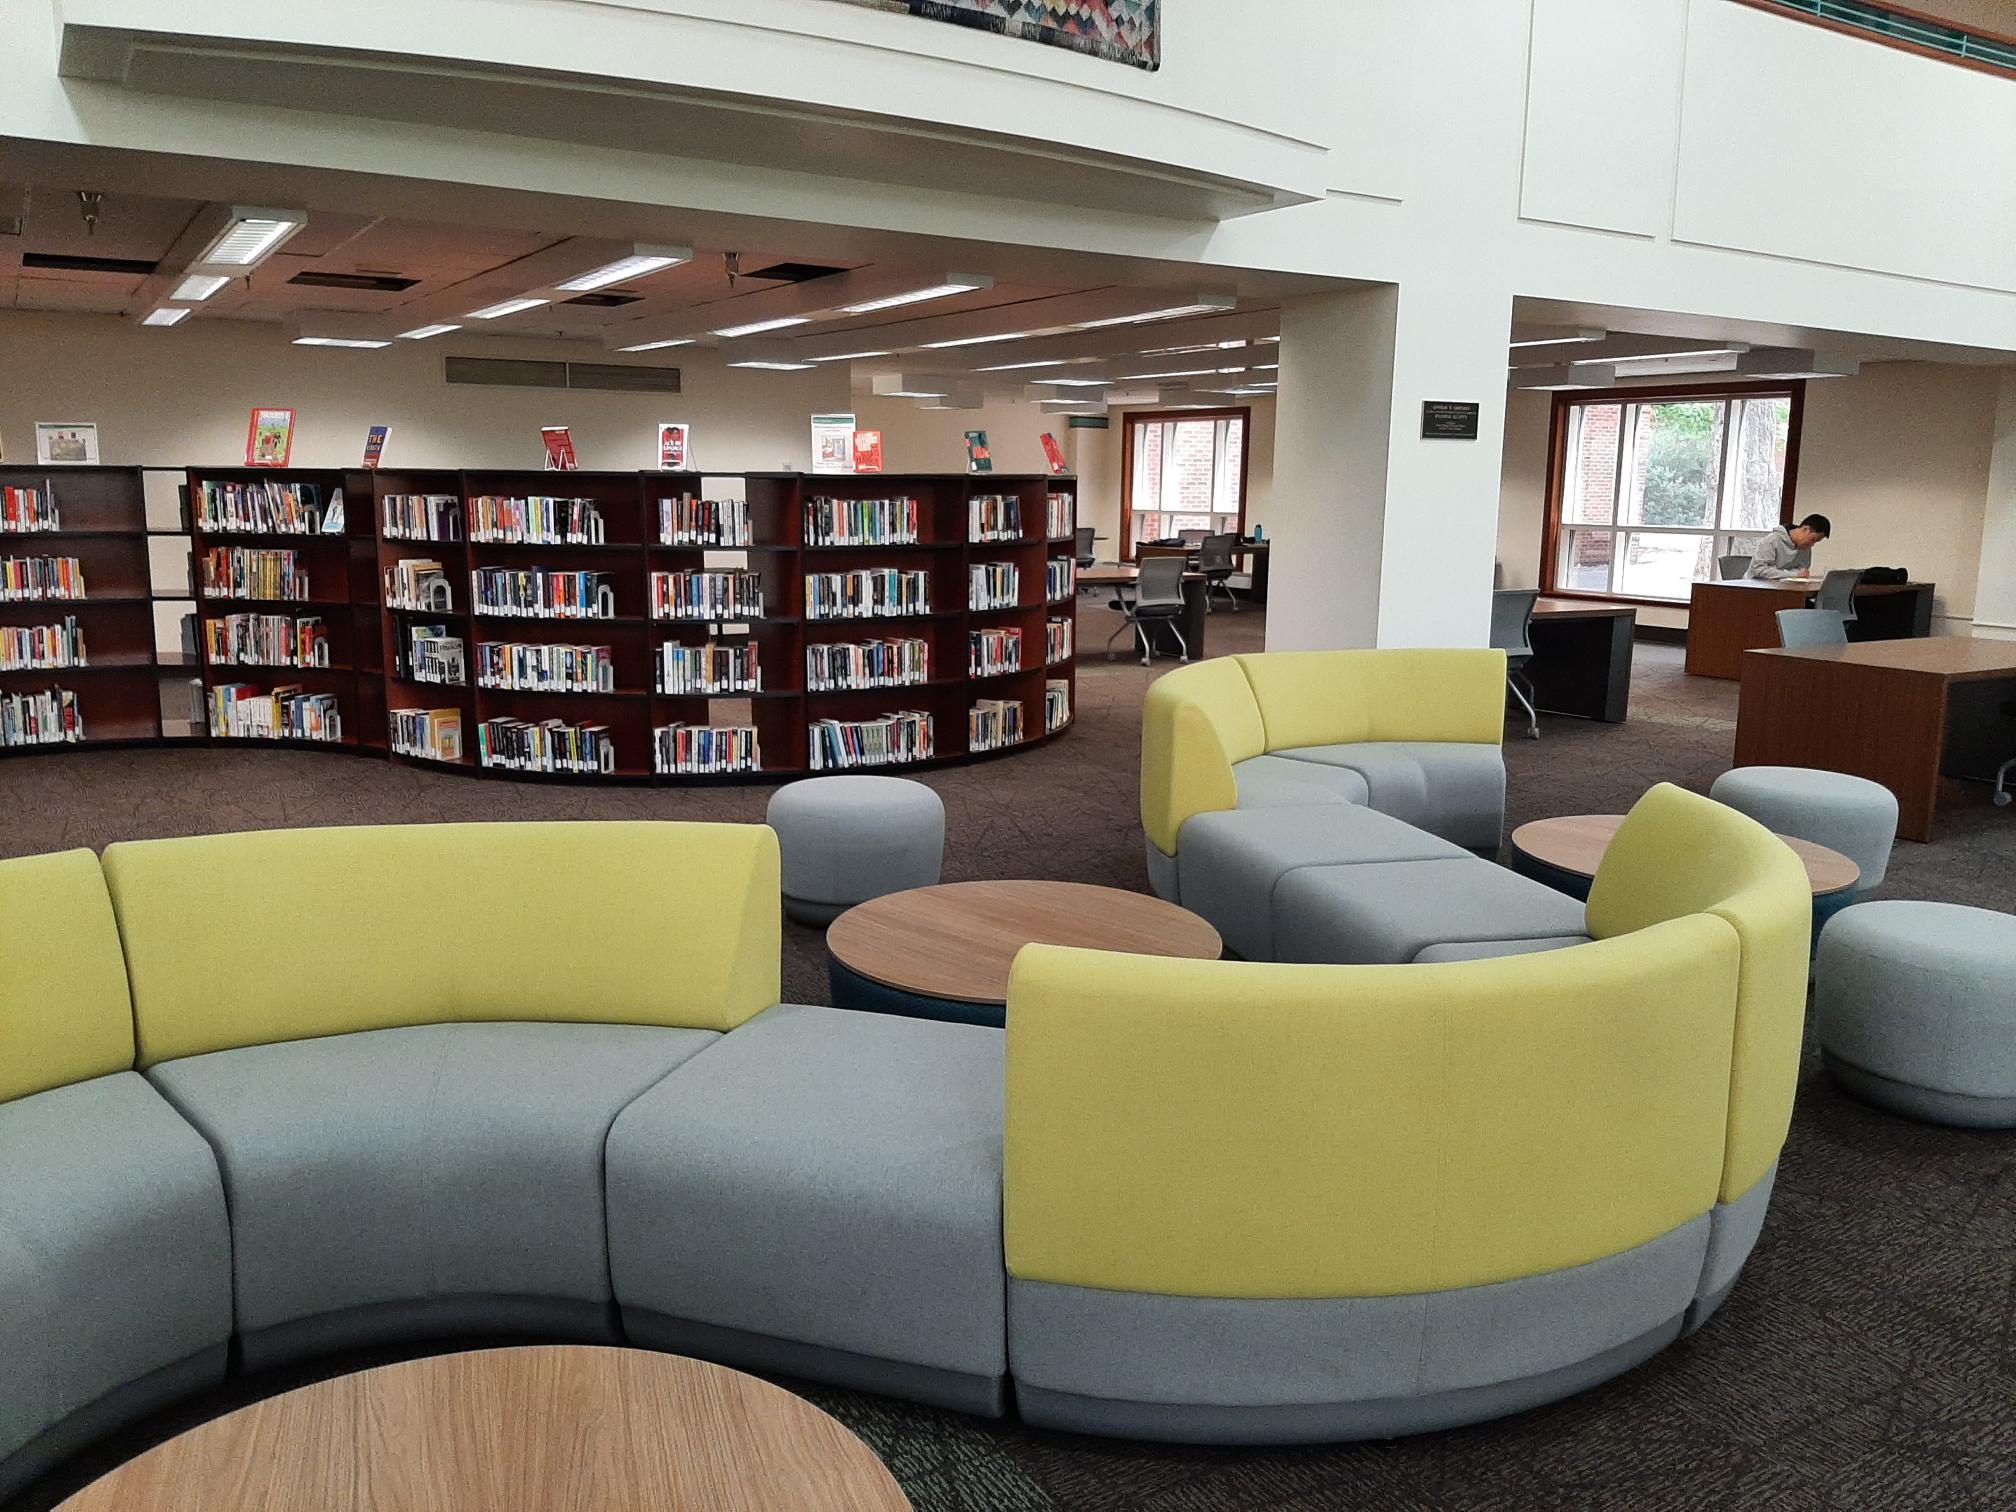 New furniture in South Reading Room of Knight Library